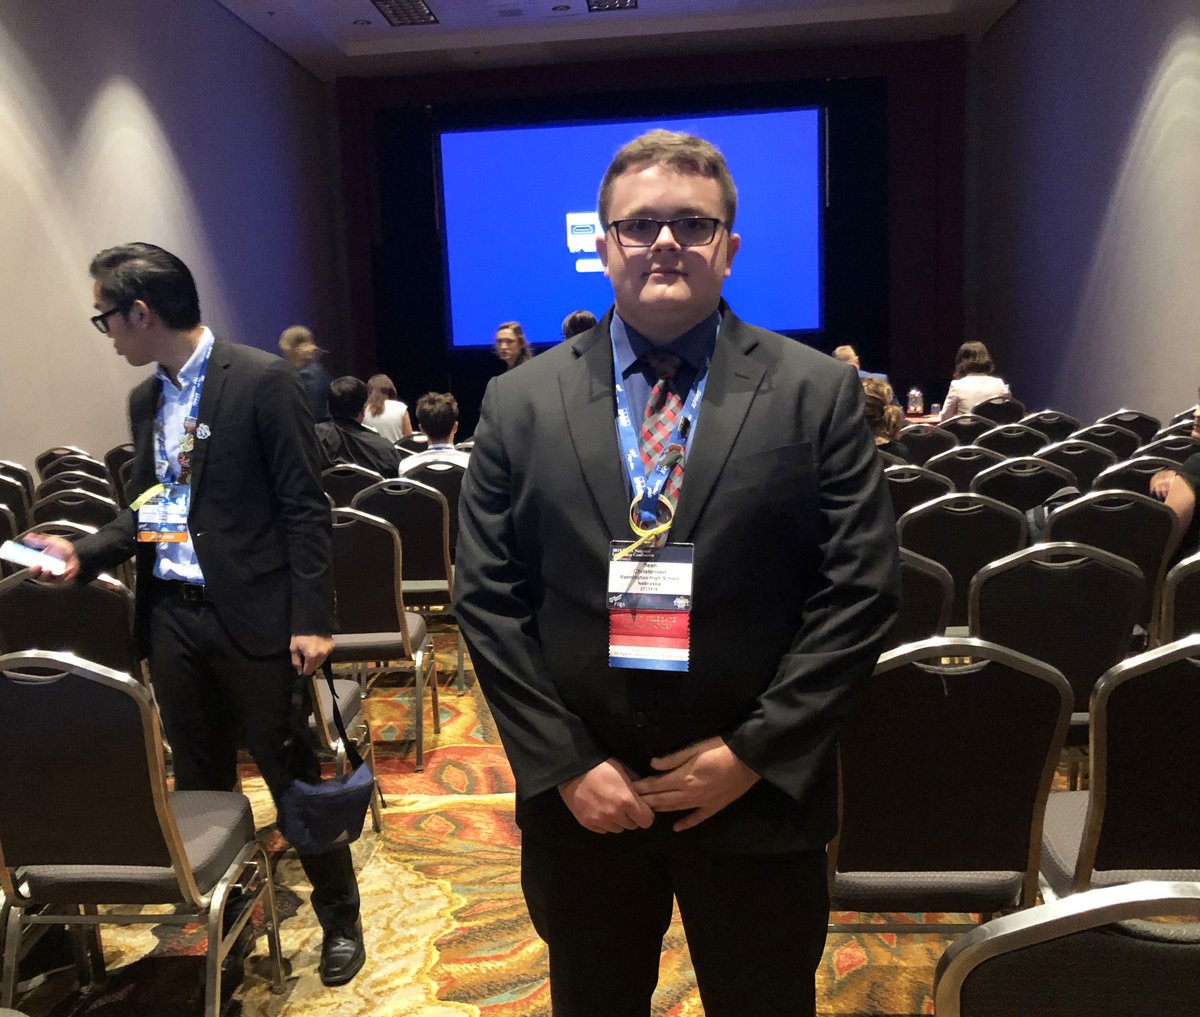 'FBLA is a wonderful program that can benefit many students and help them find their strengths.' - Connor Utech

The Foundation was happy to partially fund Connor and Sean Christensen's FBLA National Leadership Conference experience in San Antonio this summer. #projectfunding